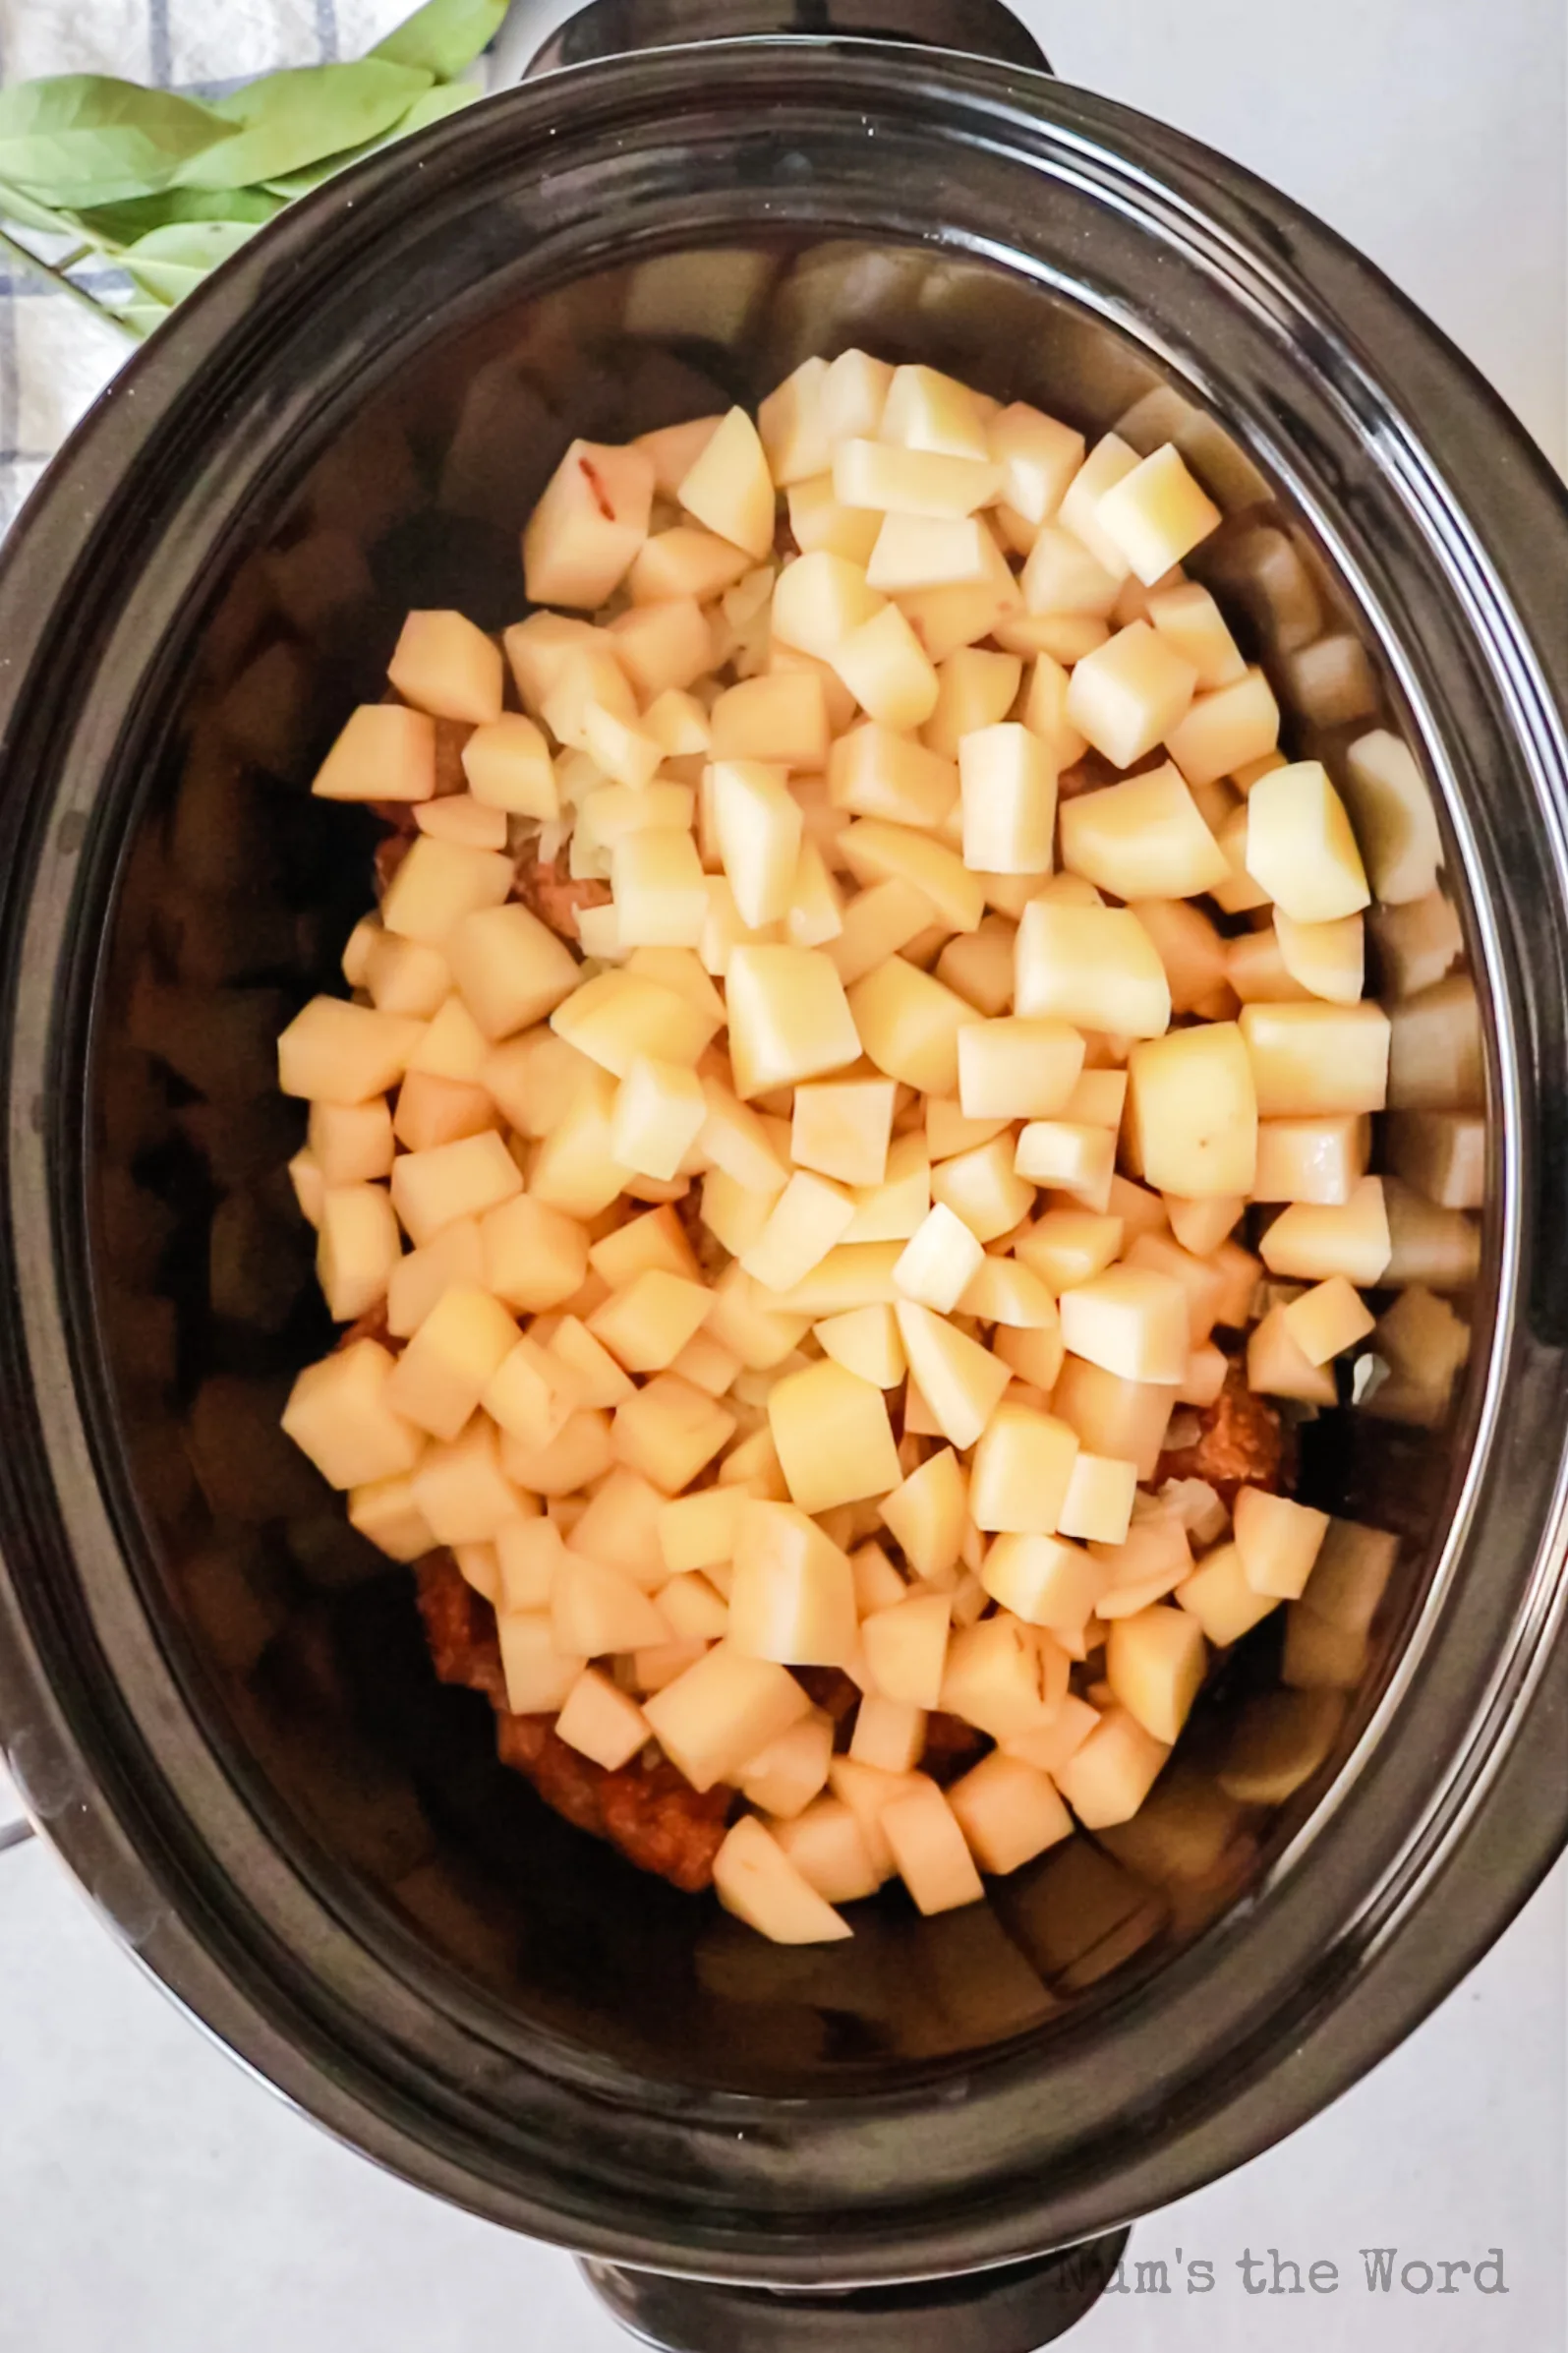 Potatoes added to crock pot on top of onions.